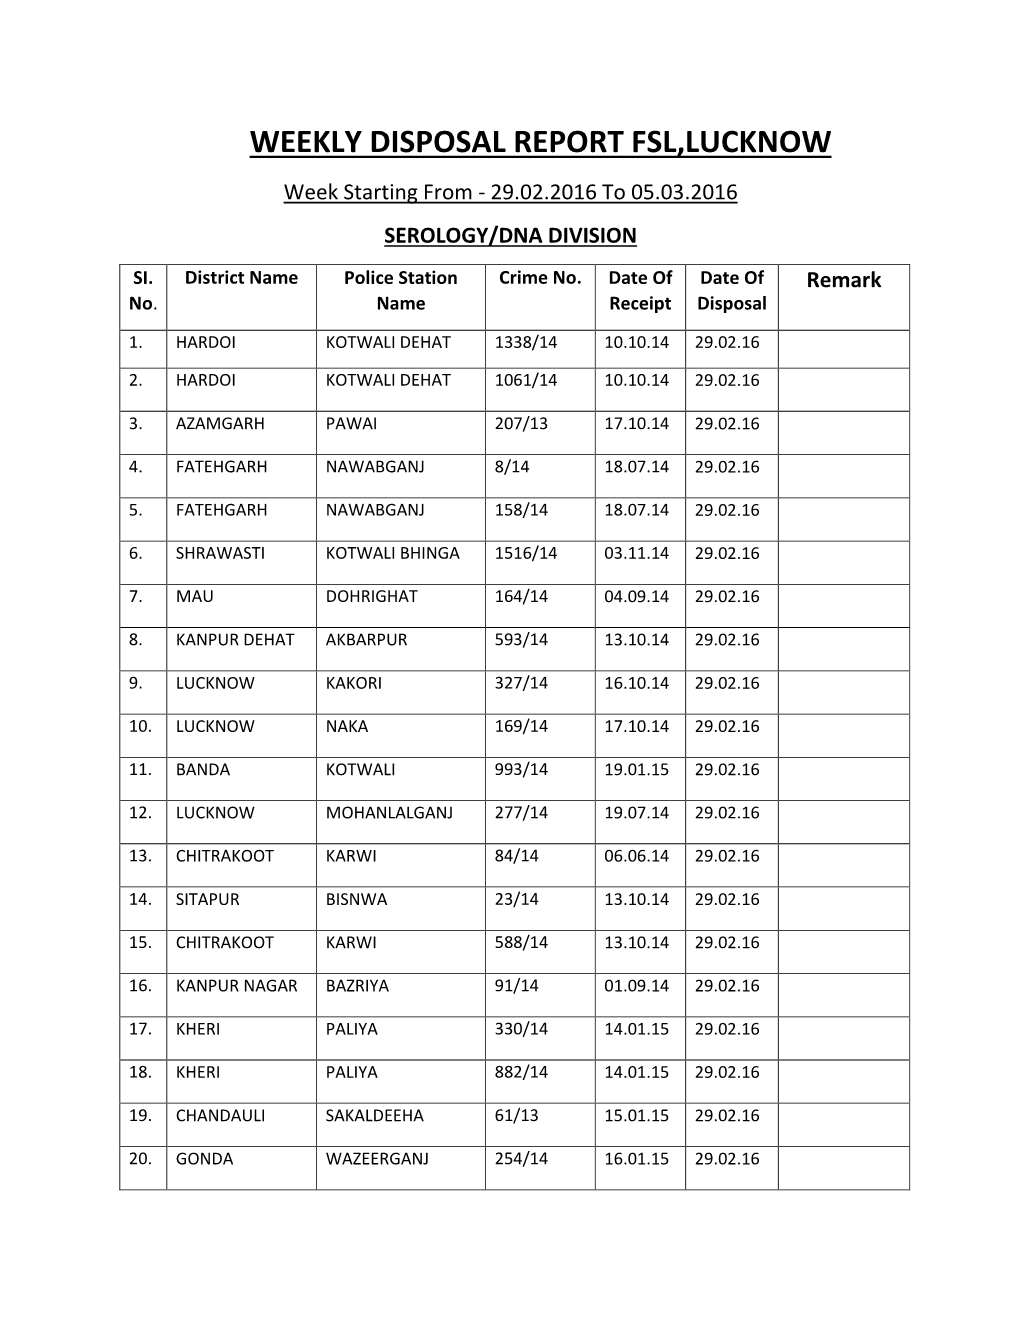 WEEKLY DISPOSAL REPORT FSL,LUCKNOW Week Starting from - 29.02.2016 to 05.03.2016 SEROLOGY/DNA DIVISION